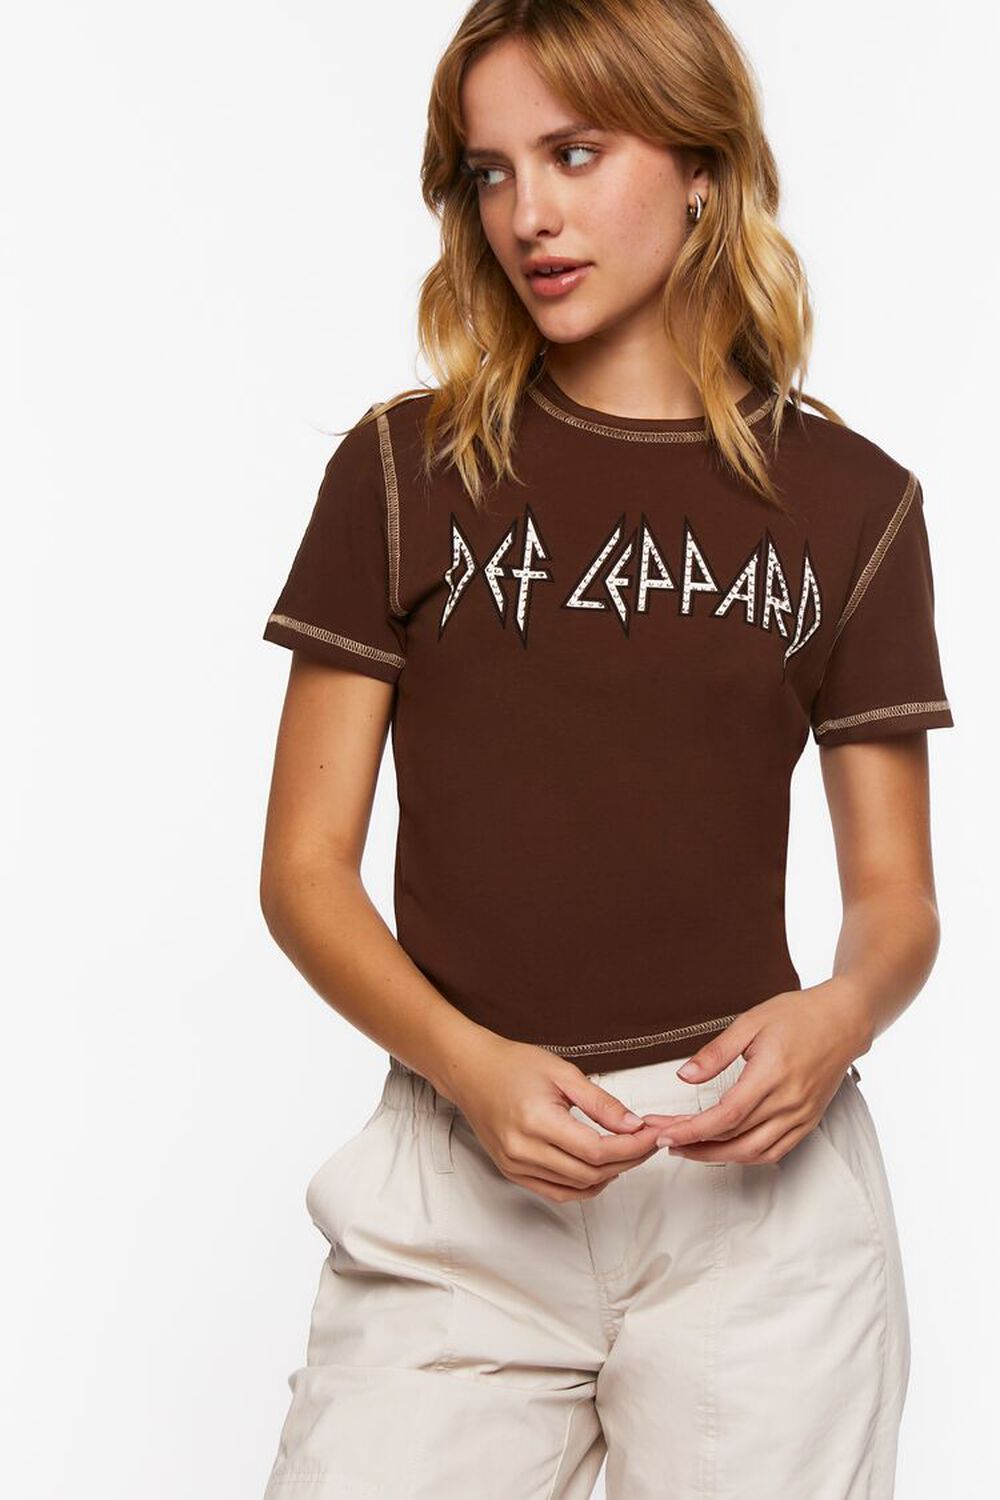 BROWN/MULTI Def Leppard Studded Graphic Baby Tee, image 1